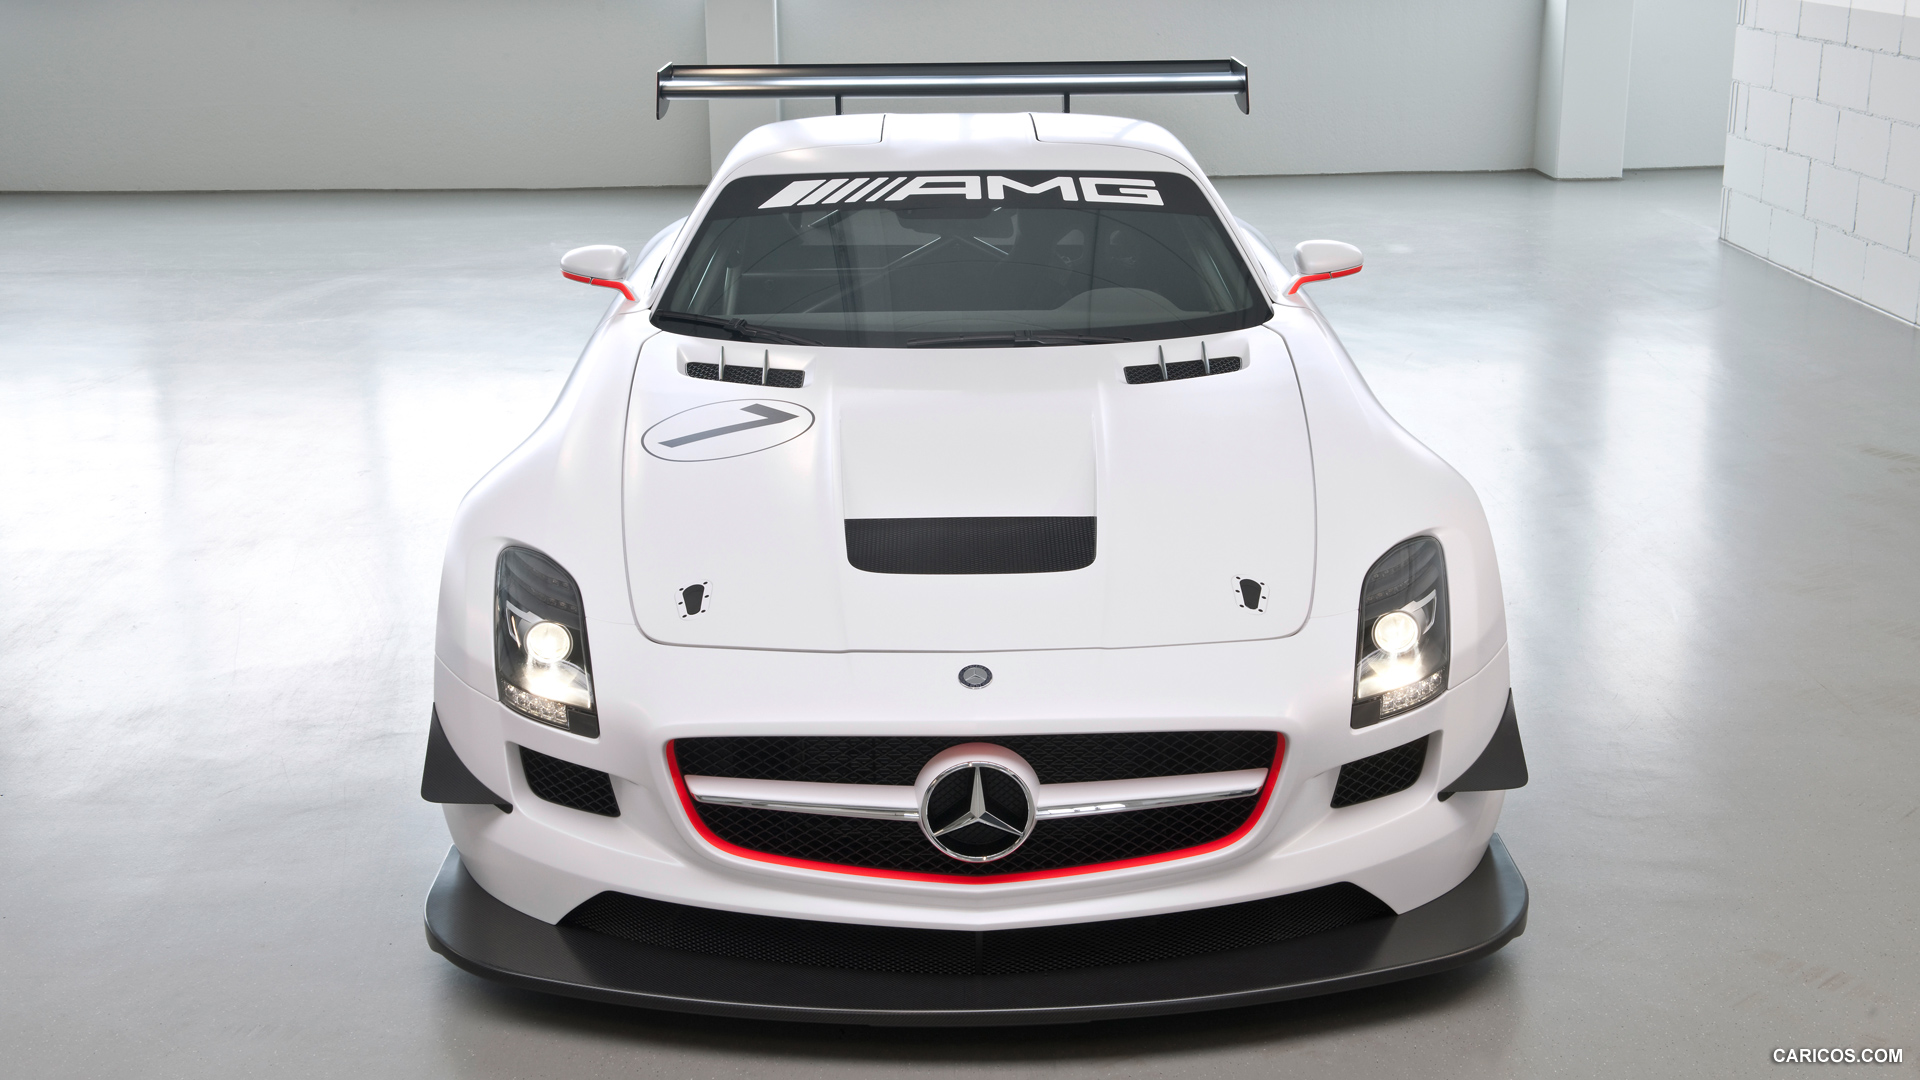 Mercedes-Benz SLS AMG GT3  - Front Angle View Photo, #25 of 30